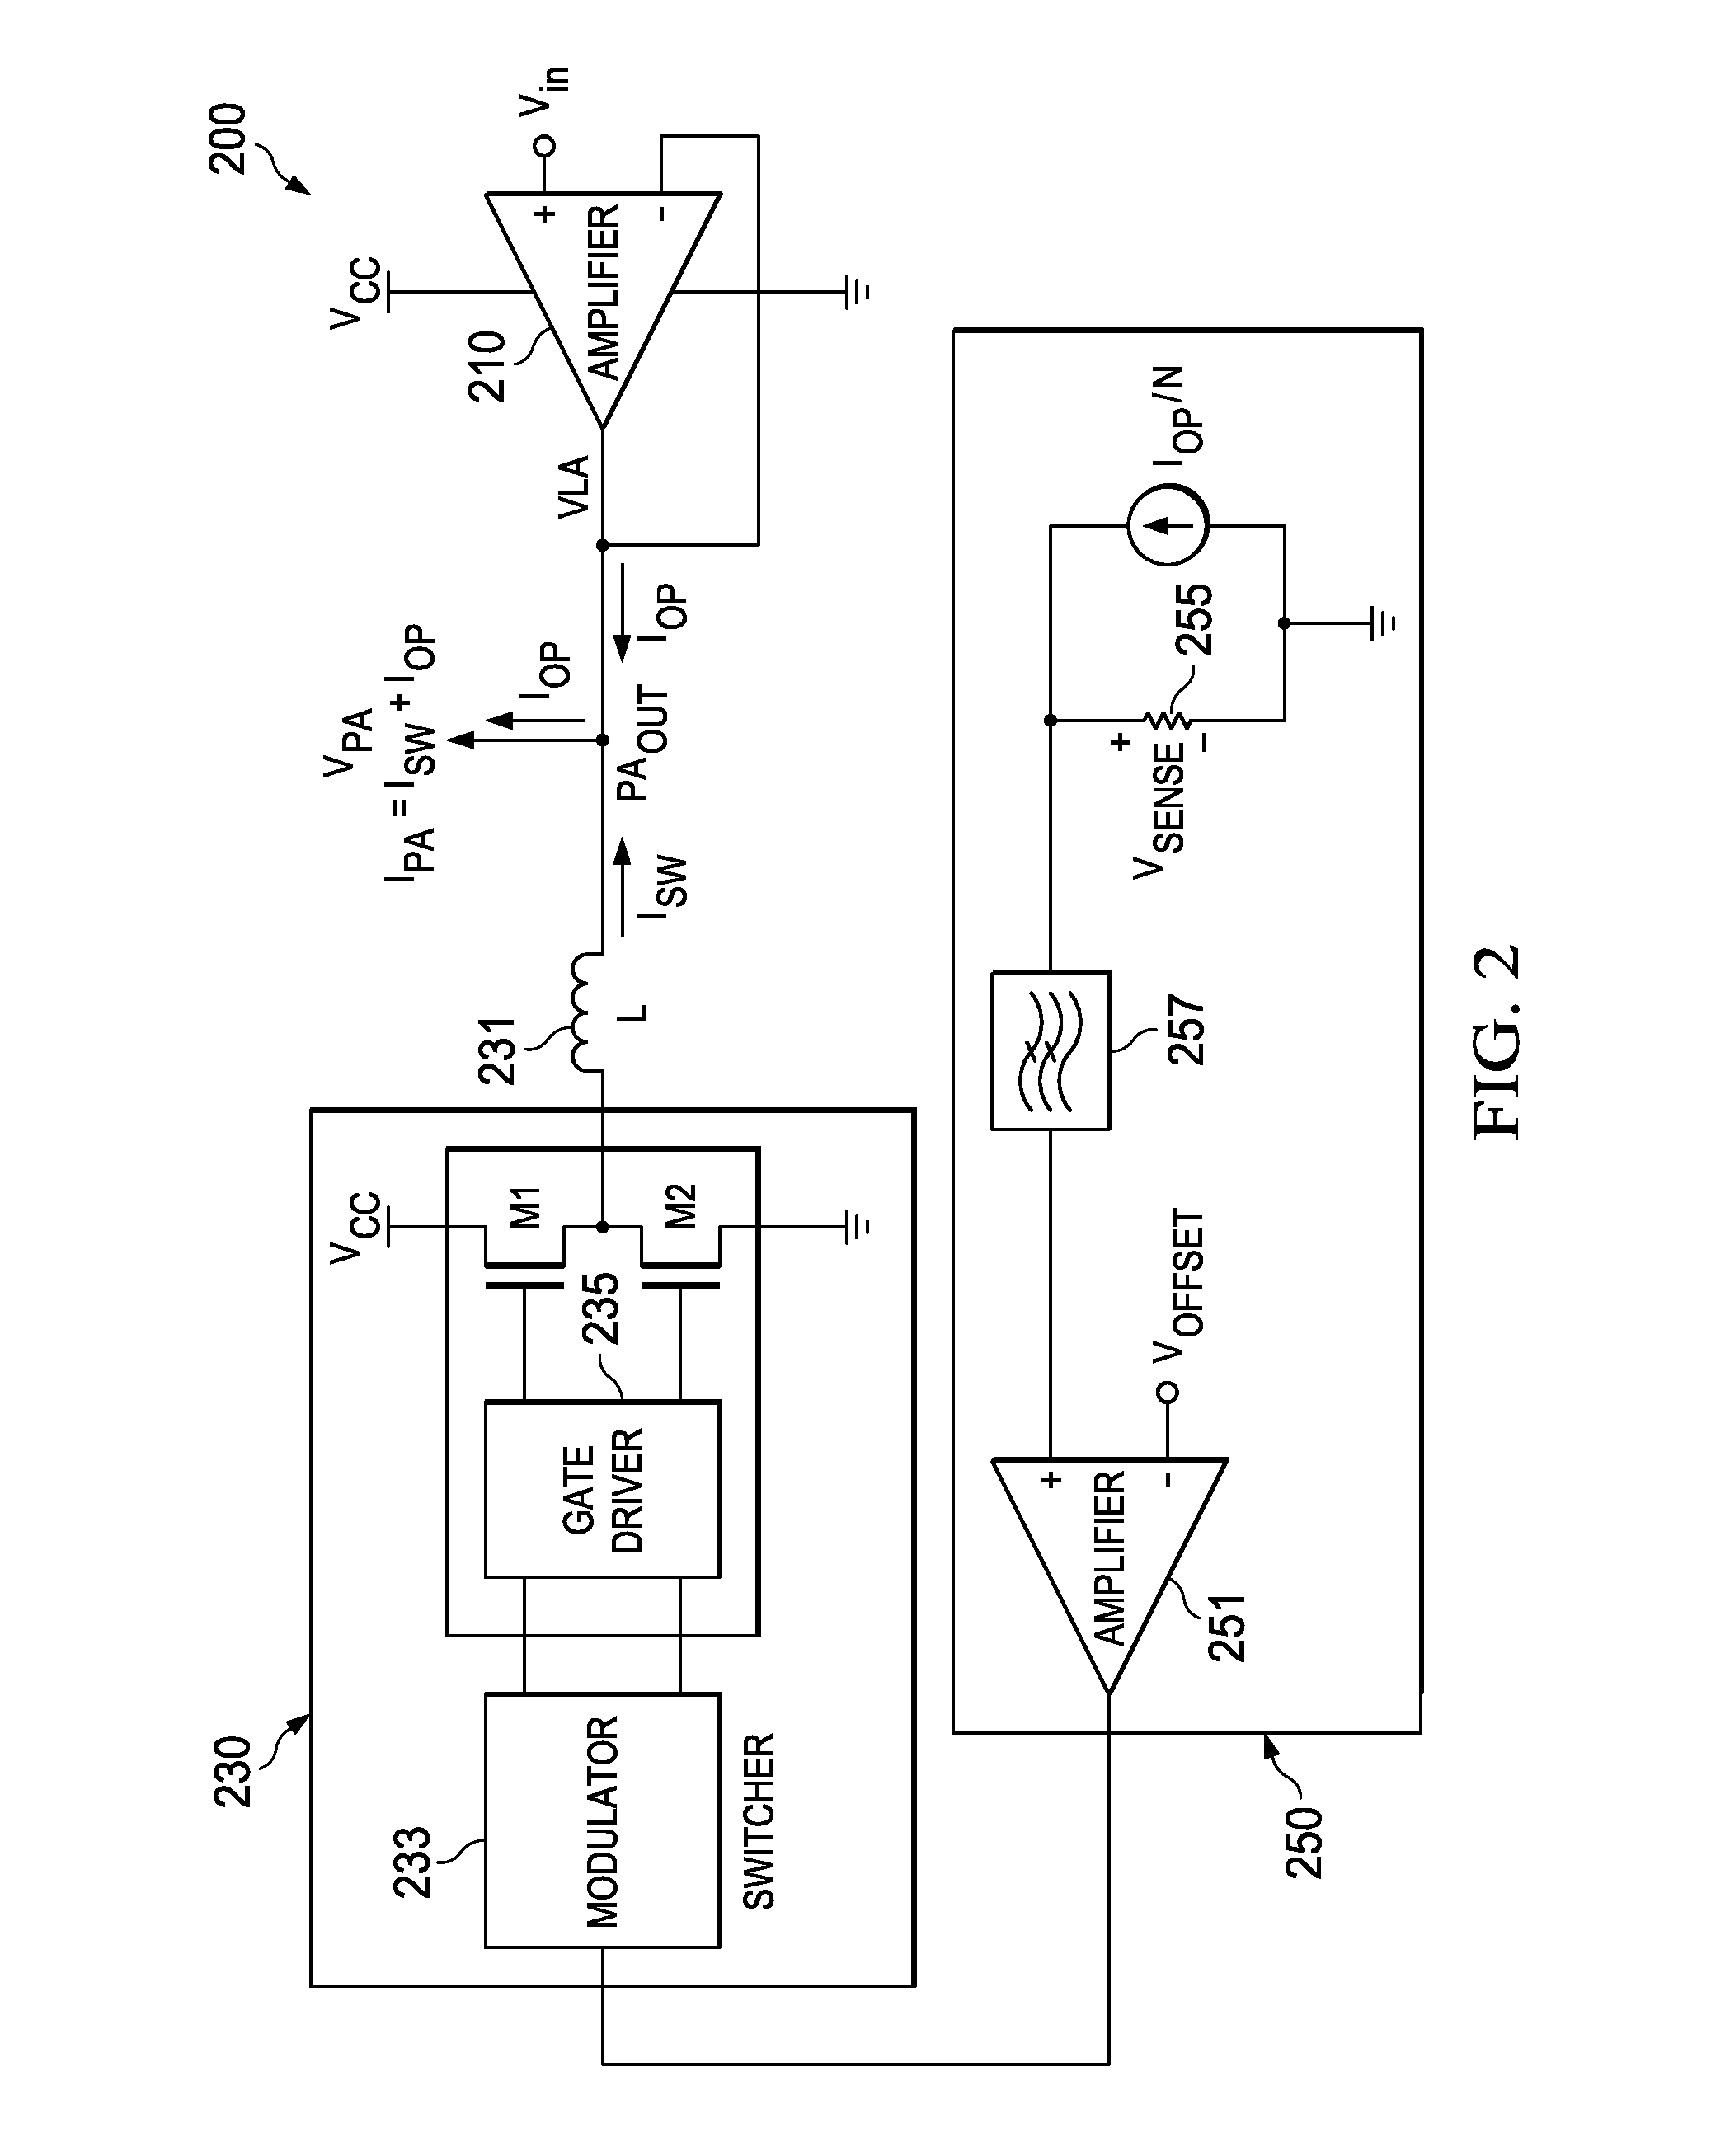 Switched mode assisted linear regulator with ac coupling with capacitive charge control